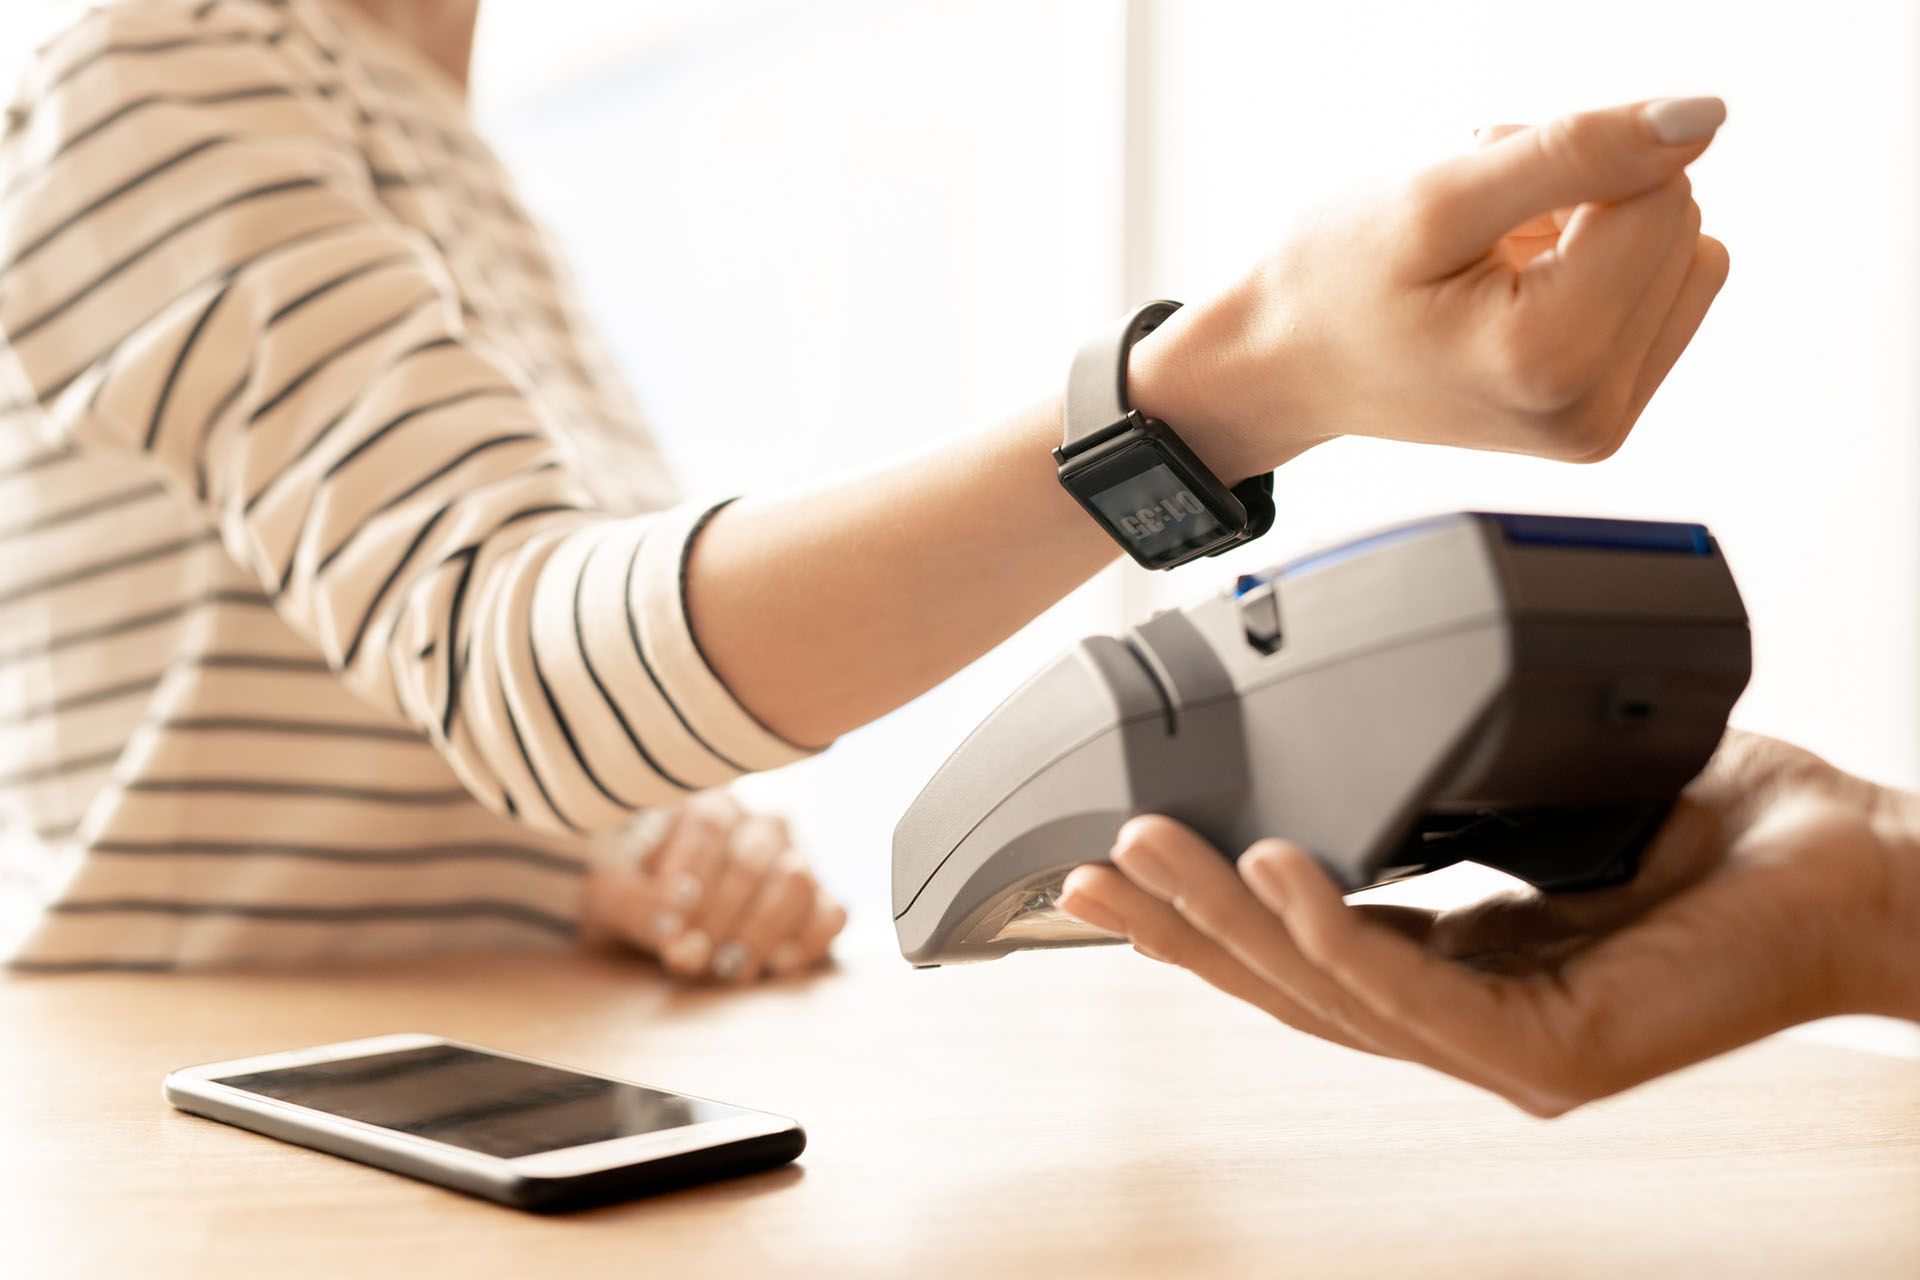 A person in a striped shirt uses their smart watch to pay at a retail point of sale.